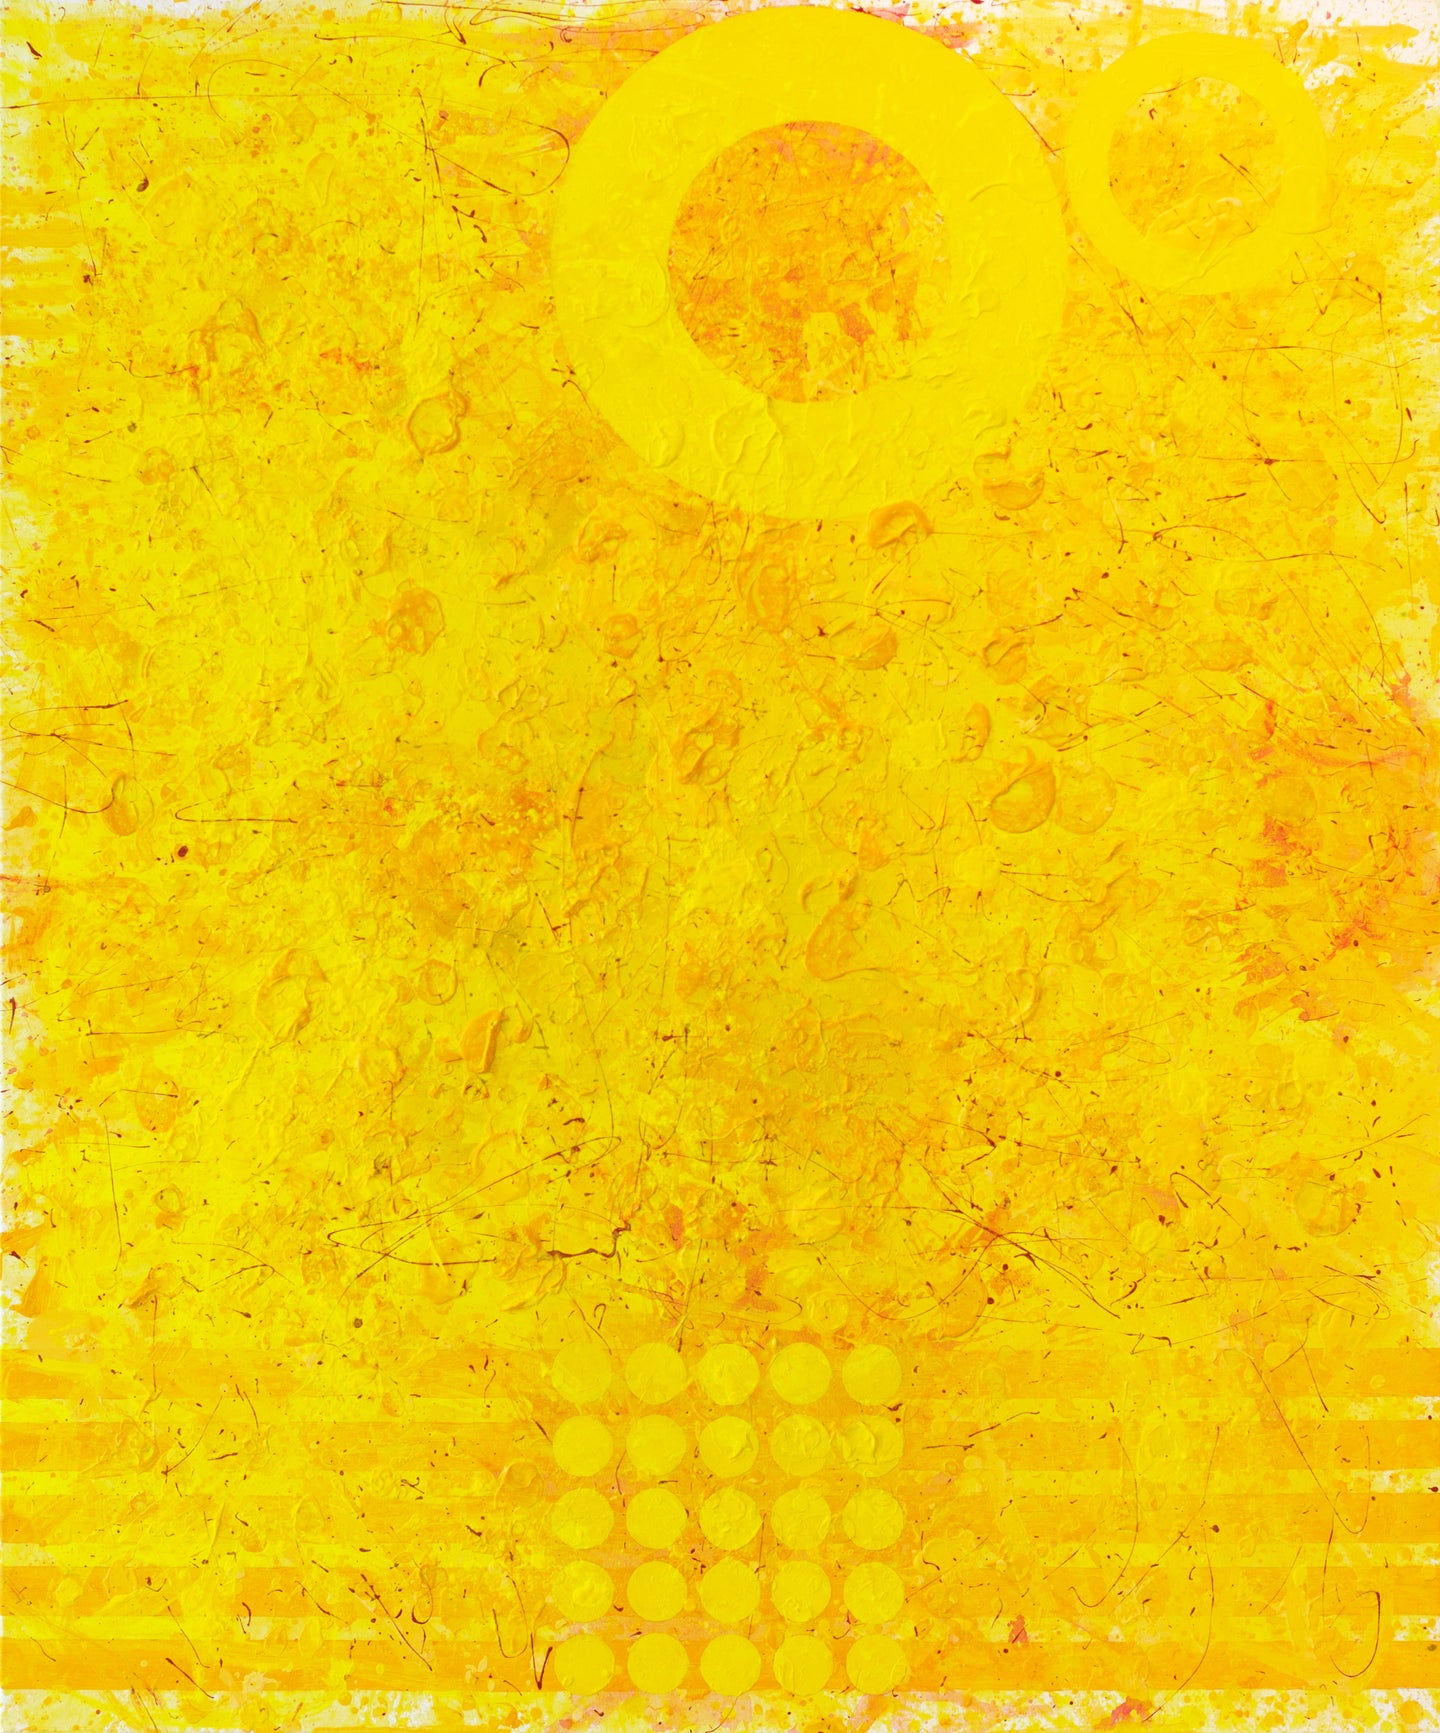 Sunshine art, Yellow Abstract Art for Sale at Manolis Projects Art Gallery, Miami Fl